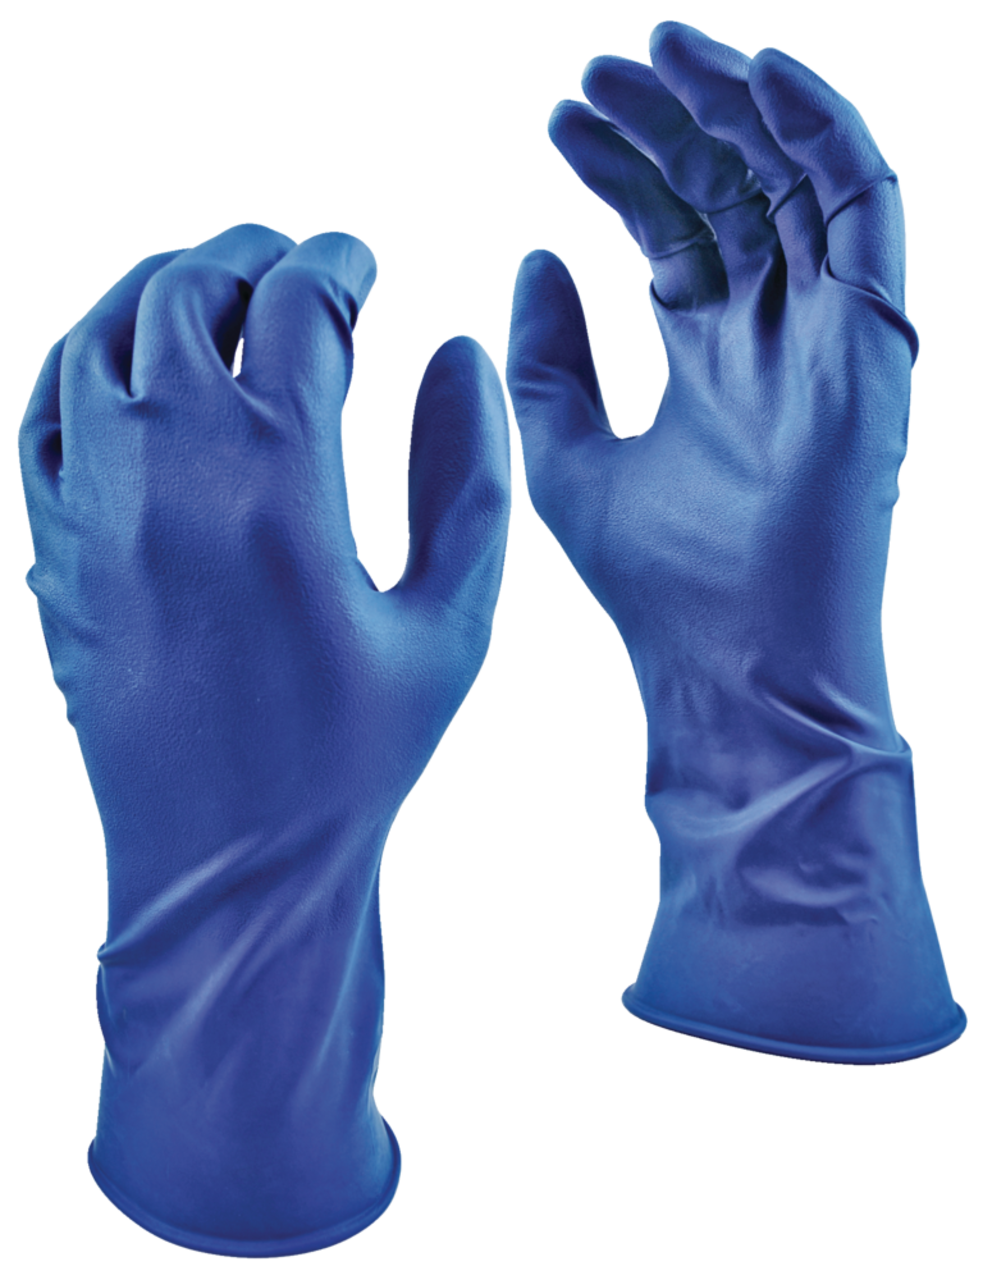 https://media-www.canadiantire.ca/product/automotive/auto-maintenance/oil-change-and-fuel-accessories/0381133/grease-monkey-15mil-latex-glove-xl-51d501cf-5fab-4f2a-b672-4237f3afe9ec.png?imdensity=1&imwidth=640&impolicy=mZoom